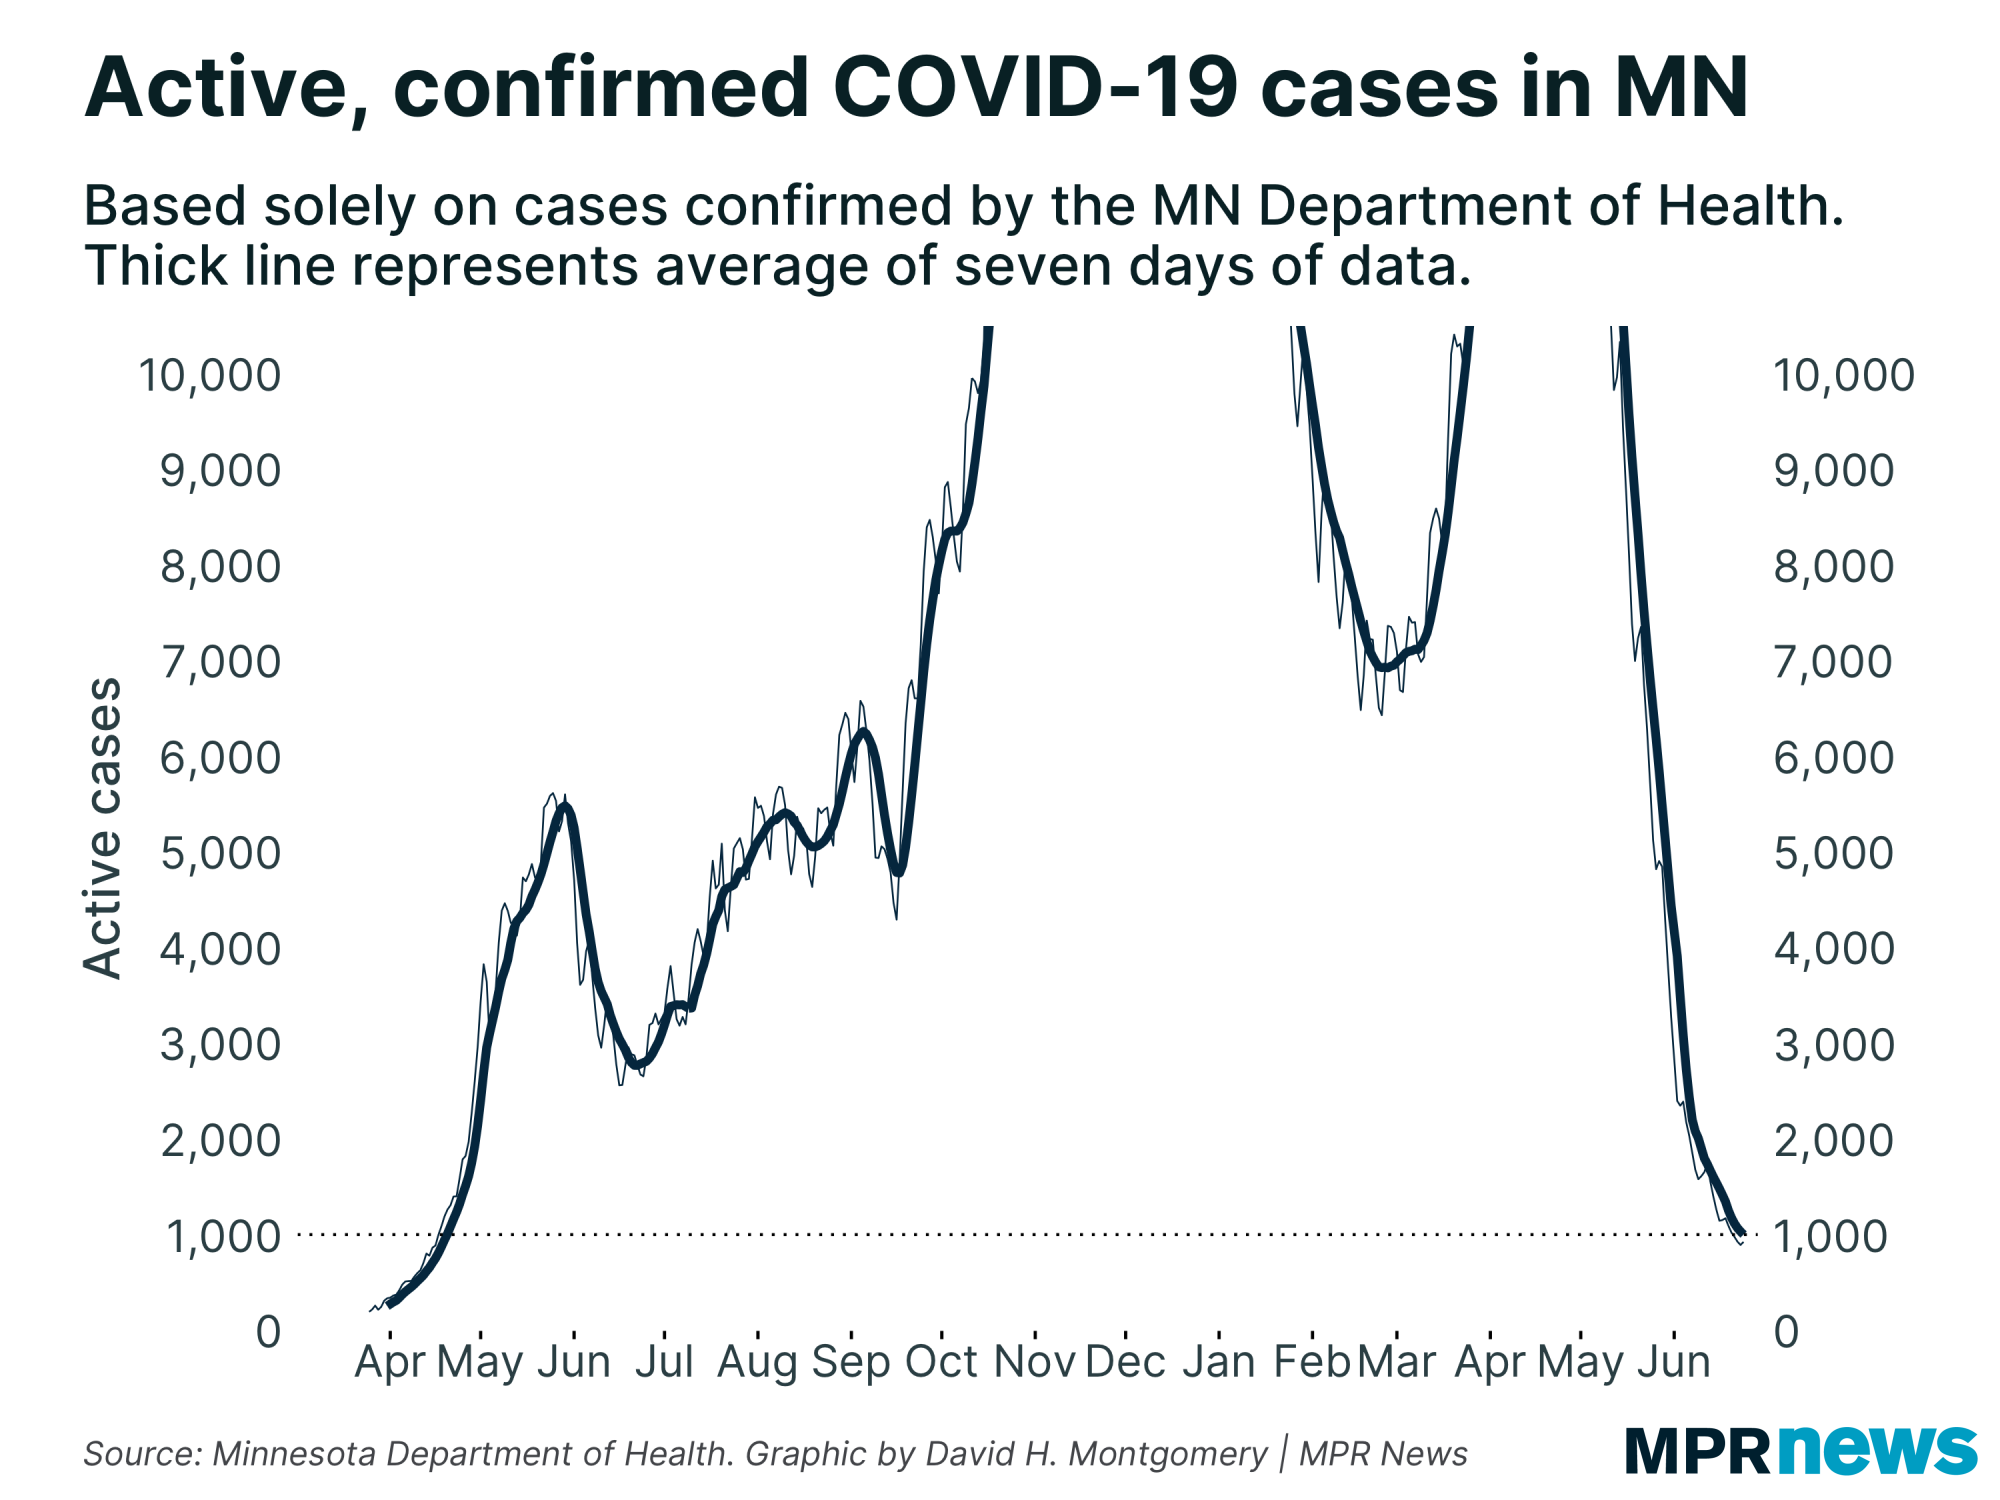 Graph of active, confirmed COVID-19 cases in Minnesota